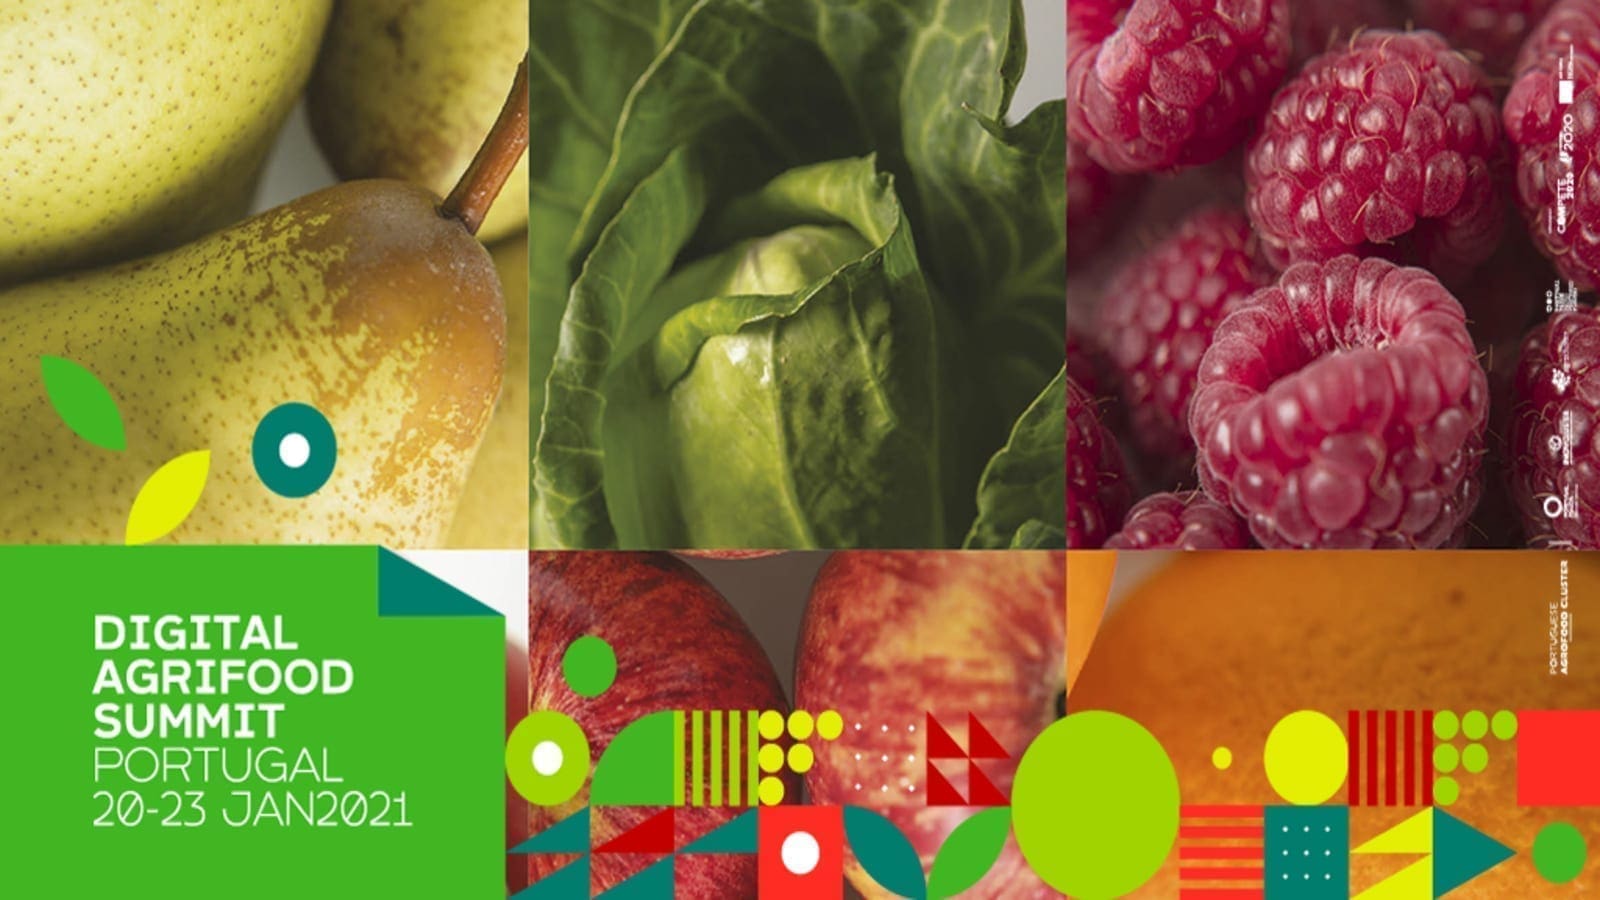 Portugal to host the first international Digital Agrofood Summit in 2021